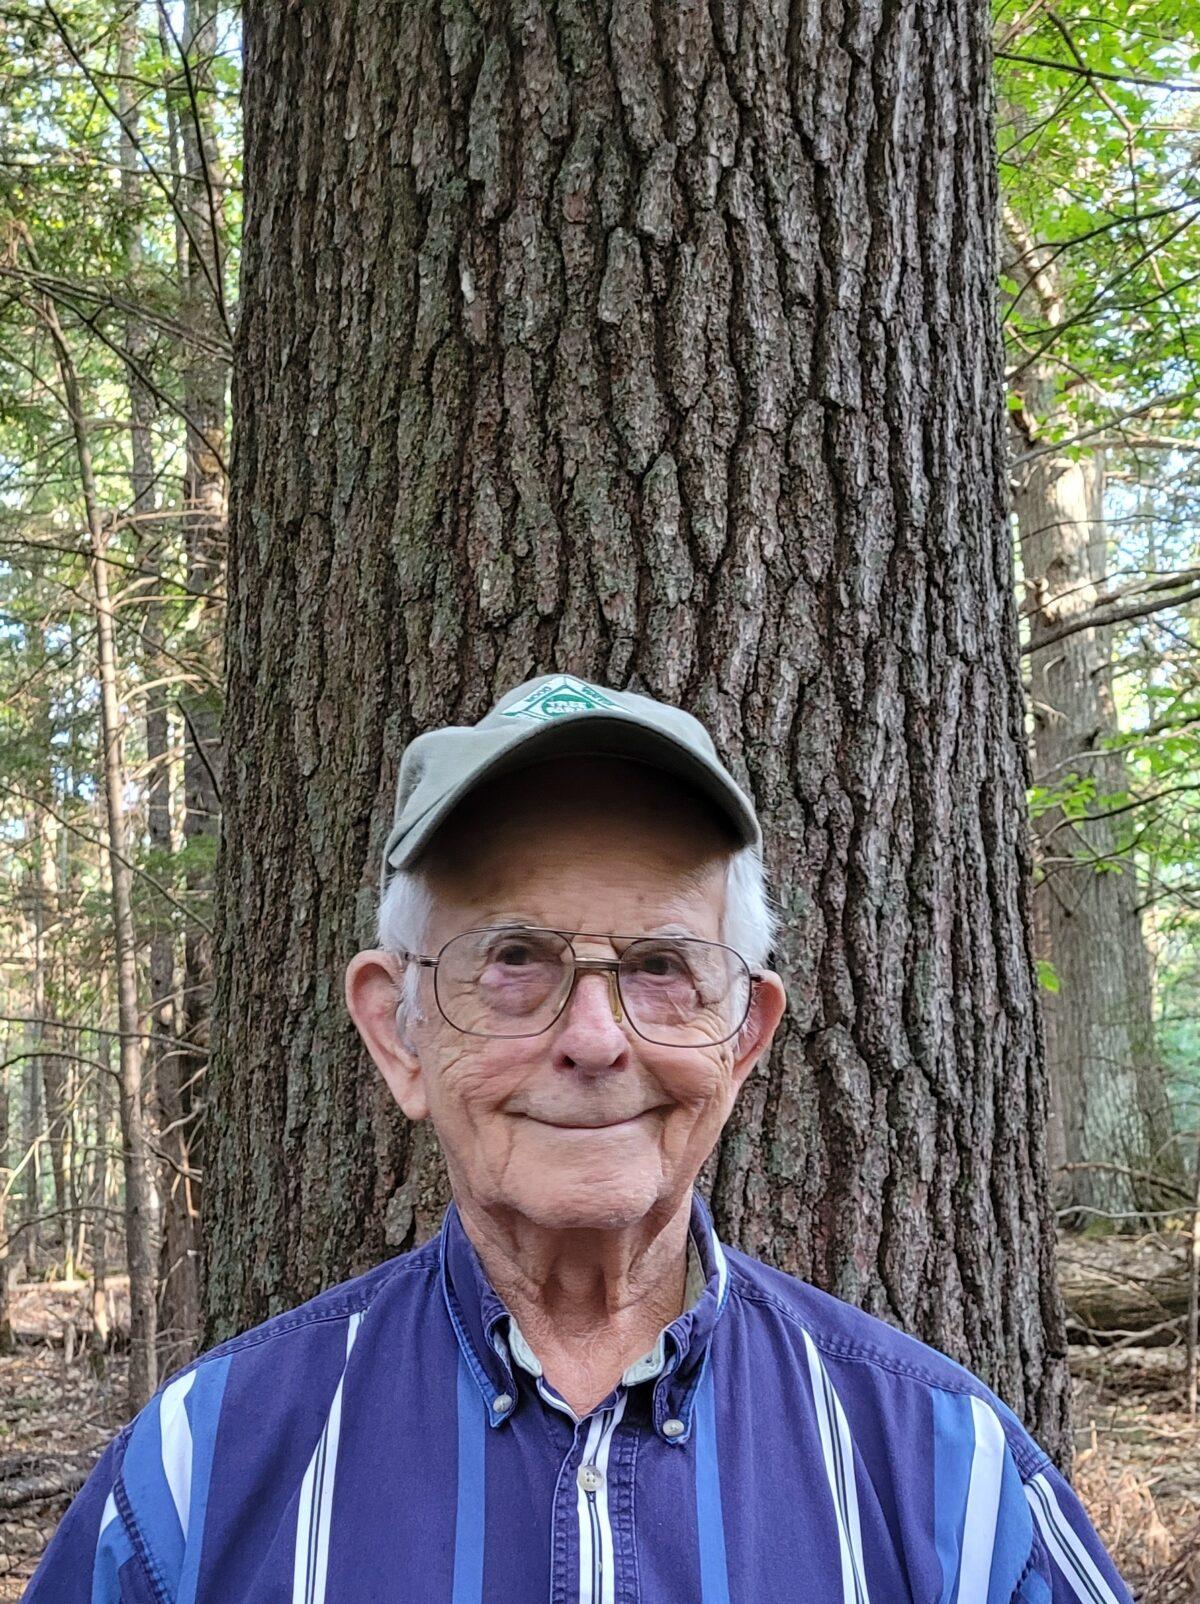 Cliff Foster with a 121-year-old, 110-foot white pine tree. The tree is three feet in diameter and would fetch around $8,000 on the retail market when cut into planks. His son Greg might not cut it, because it has sentimental value. (Peter Falkenberg Brown)